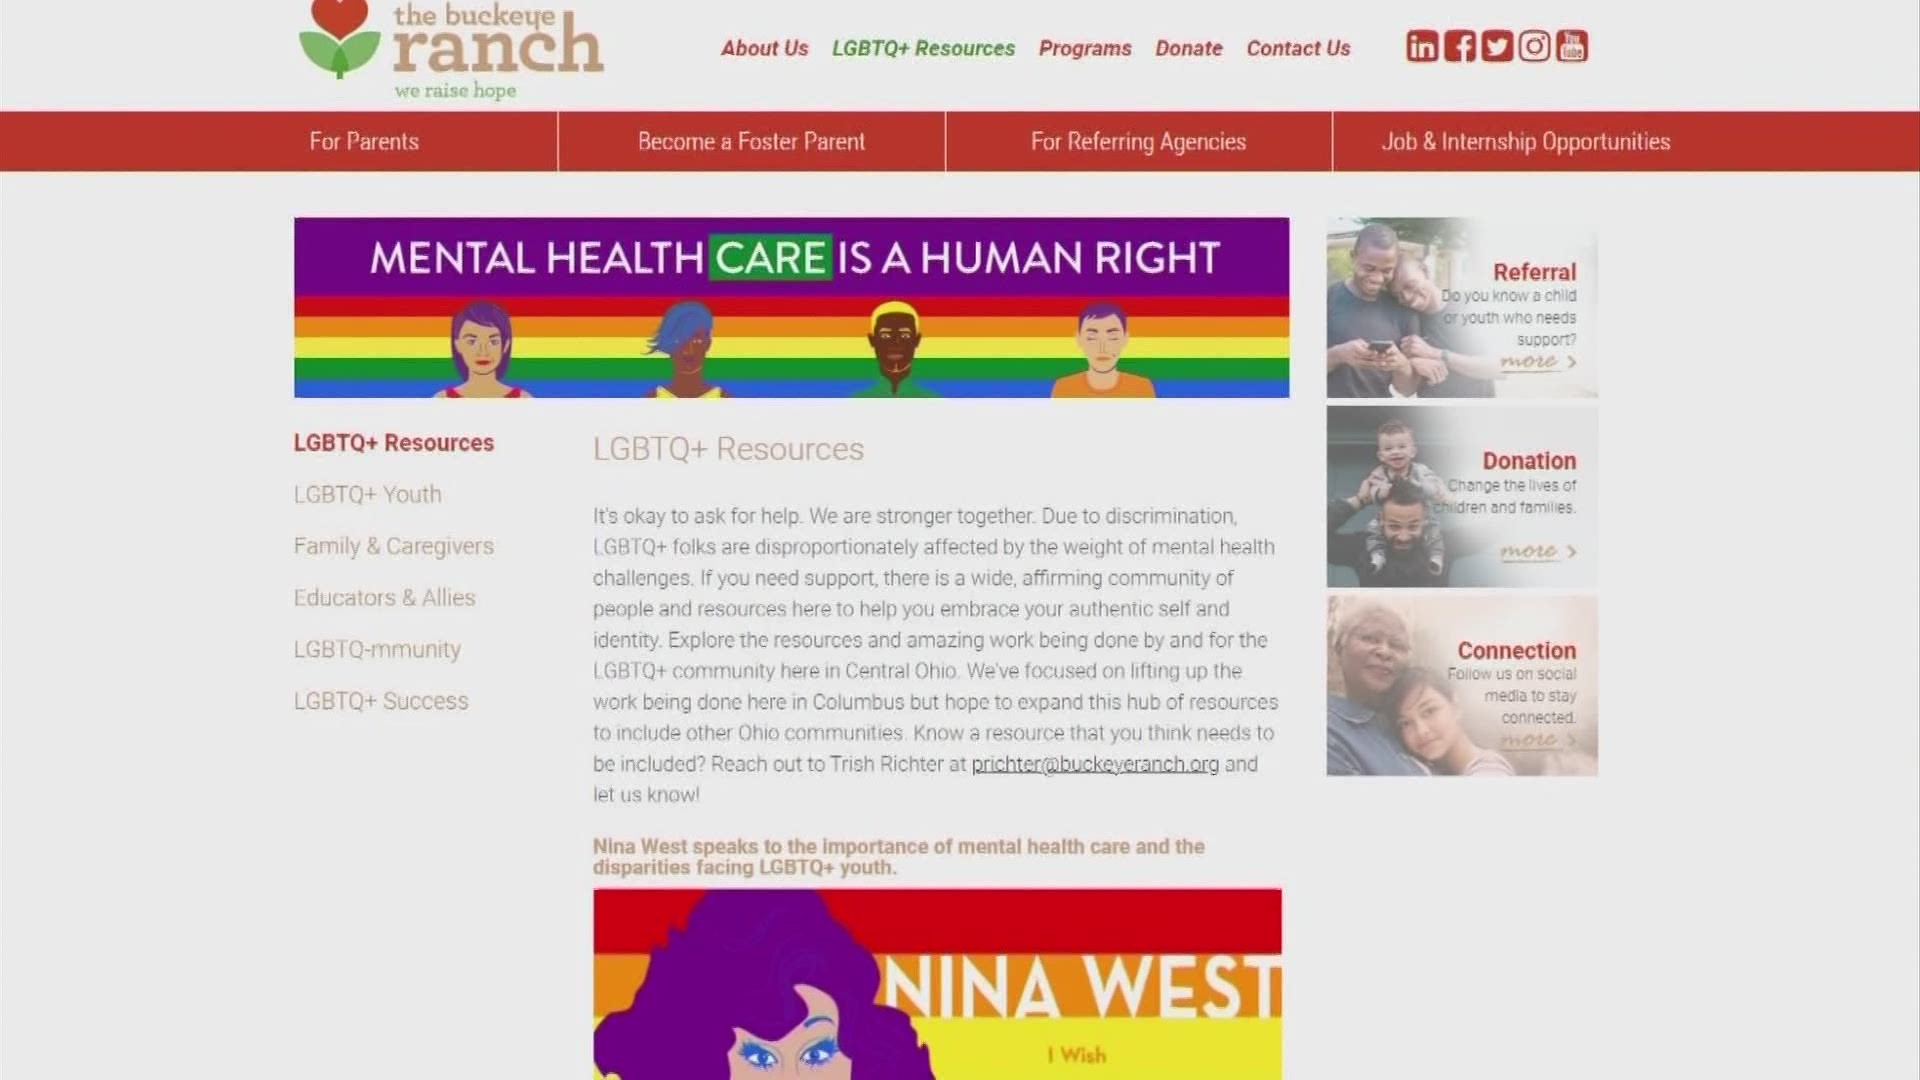 The Buckeye Ranch is teaming up with Nina West to bring awareness to mental health needs in the LGBTQ+ community.